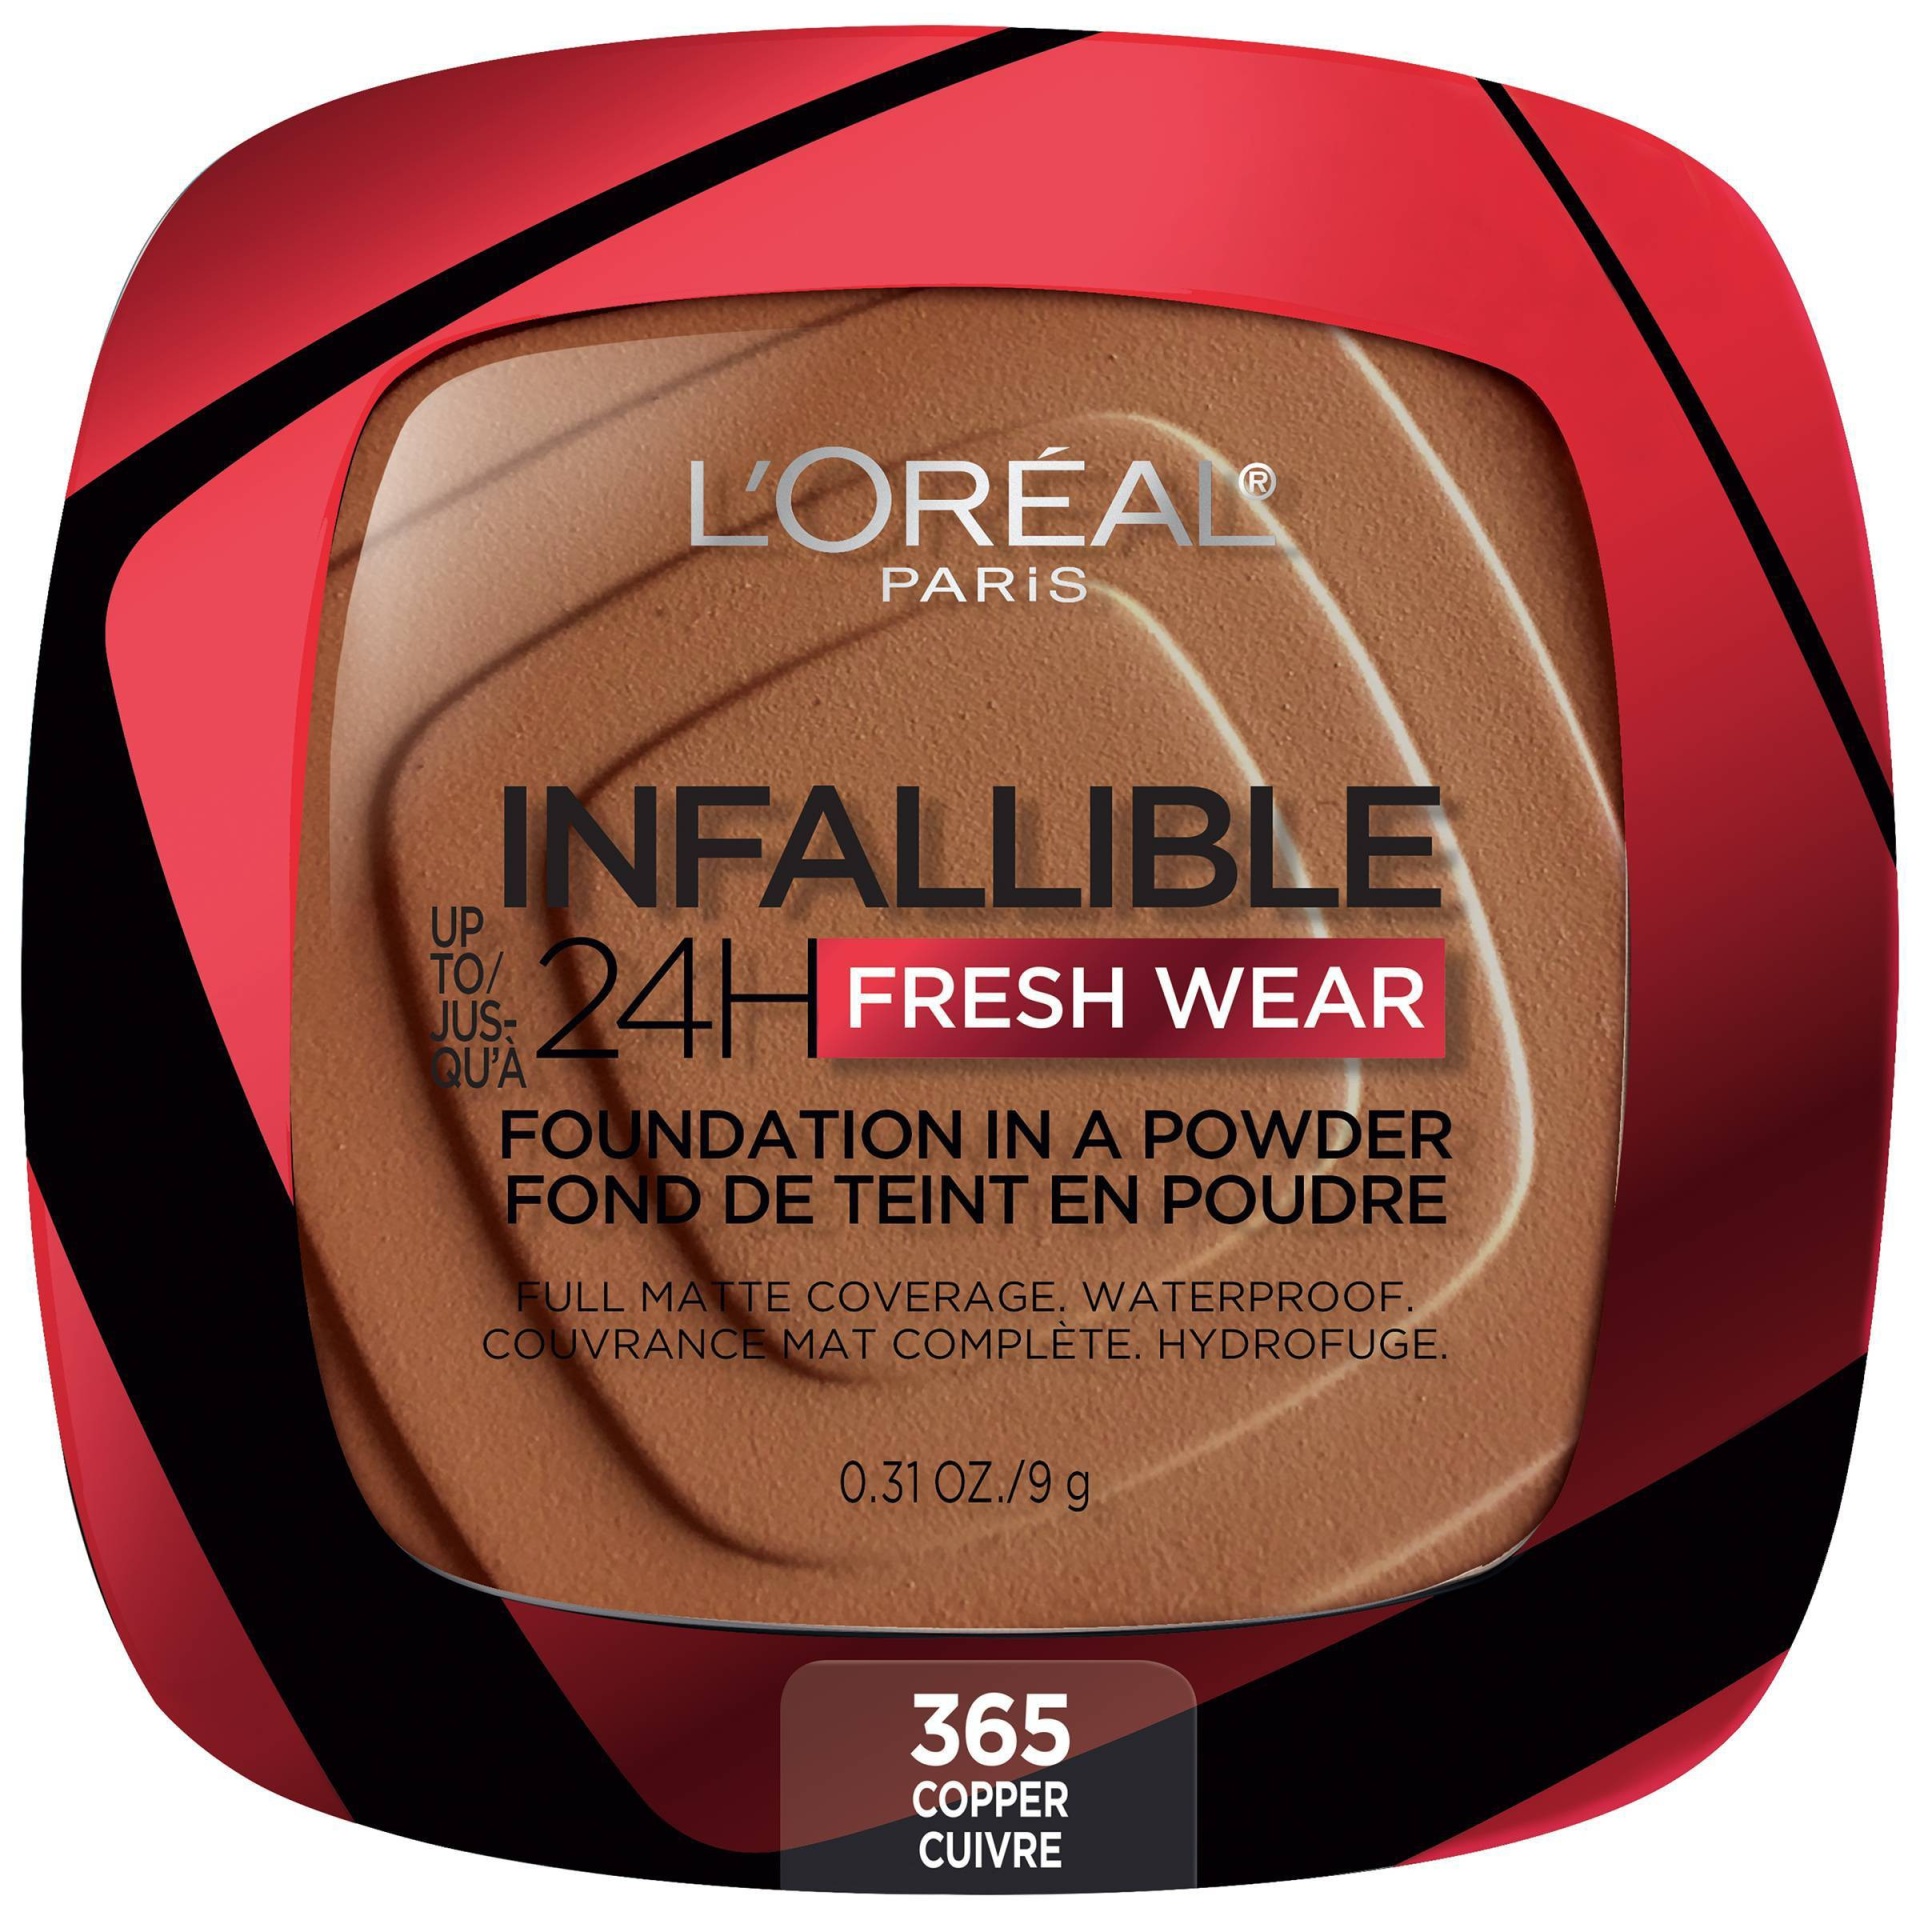 slide 1 of 1, L'Oréal L'Oreal Up to 24H Fresh Wear Foundation-in-a-Powder - Copper (365), 0.31 oz